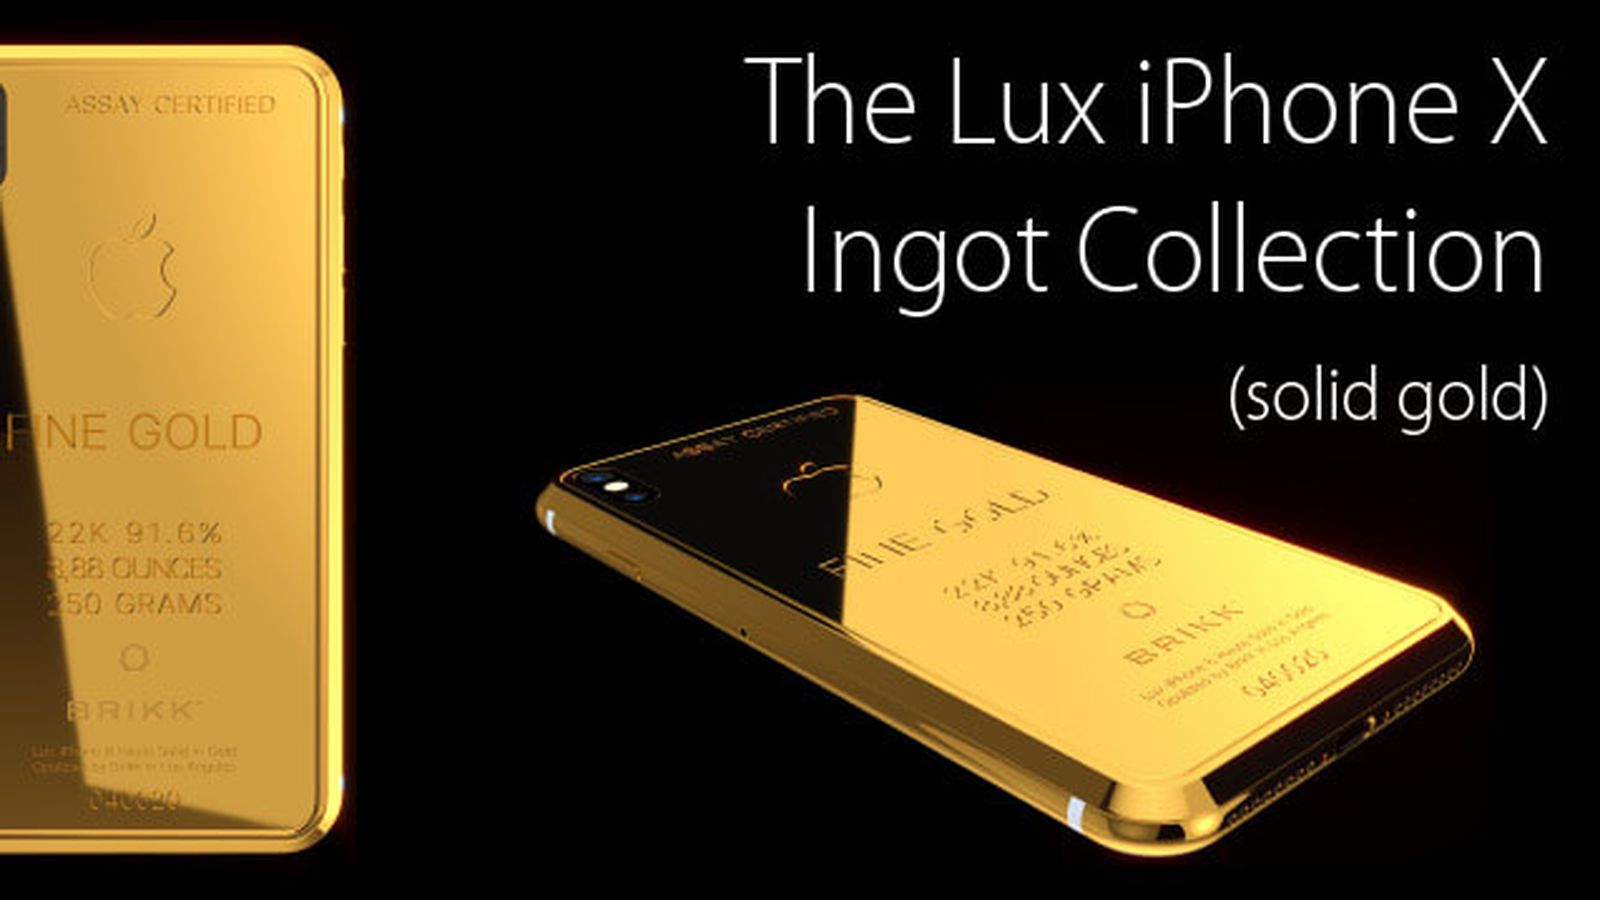 Brikk Launches Pre Orders For Gold Plated Iphone X Models Costing Up To 70k Macrumors